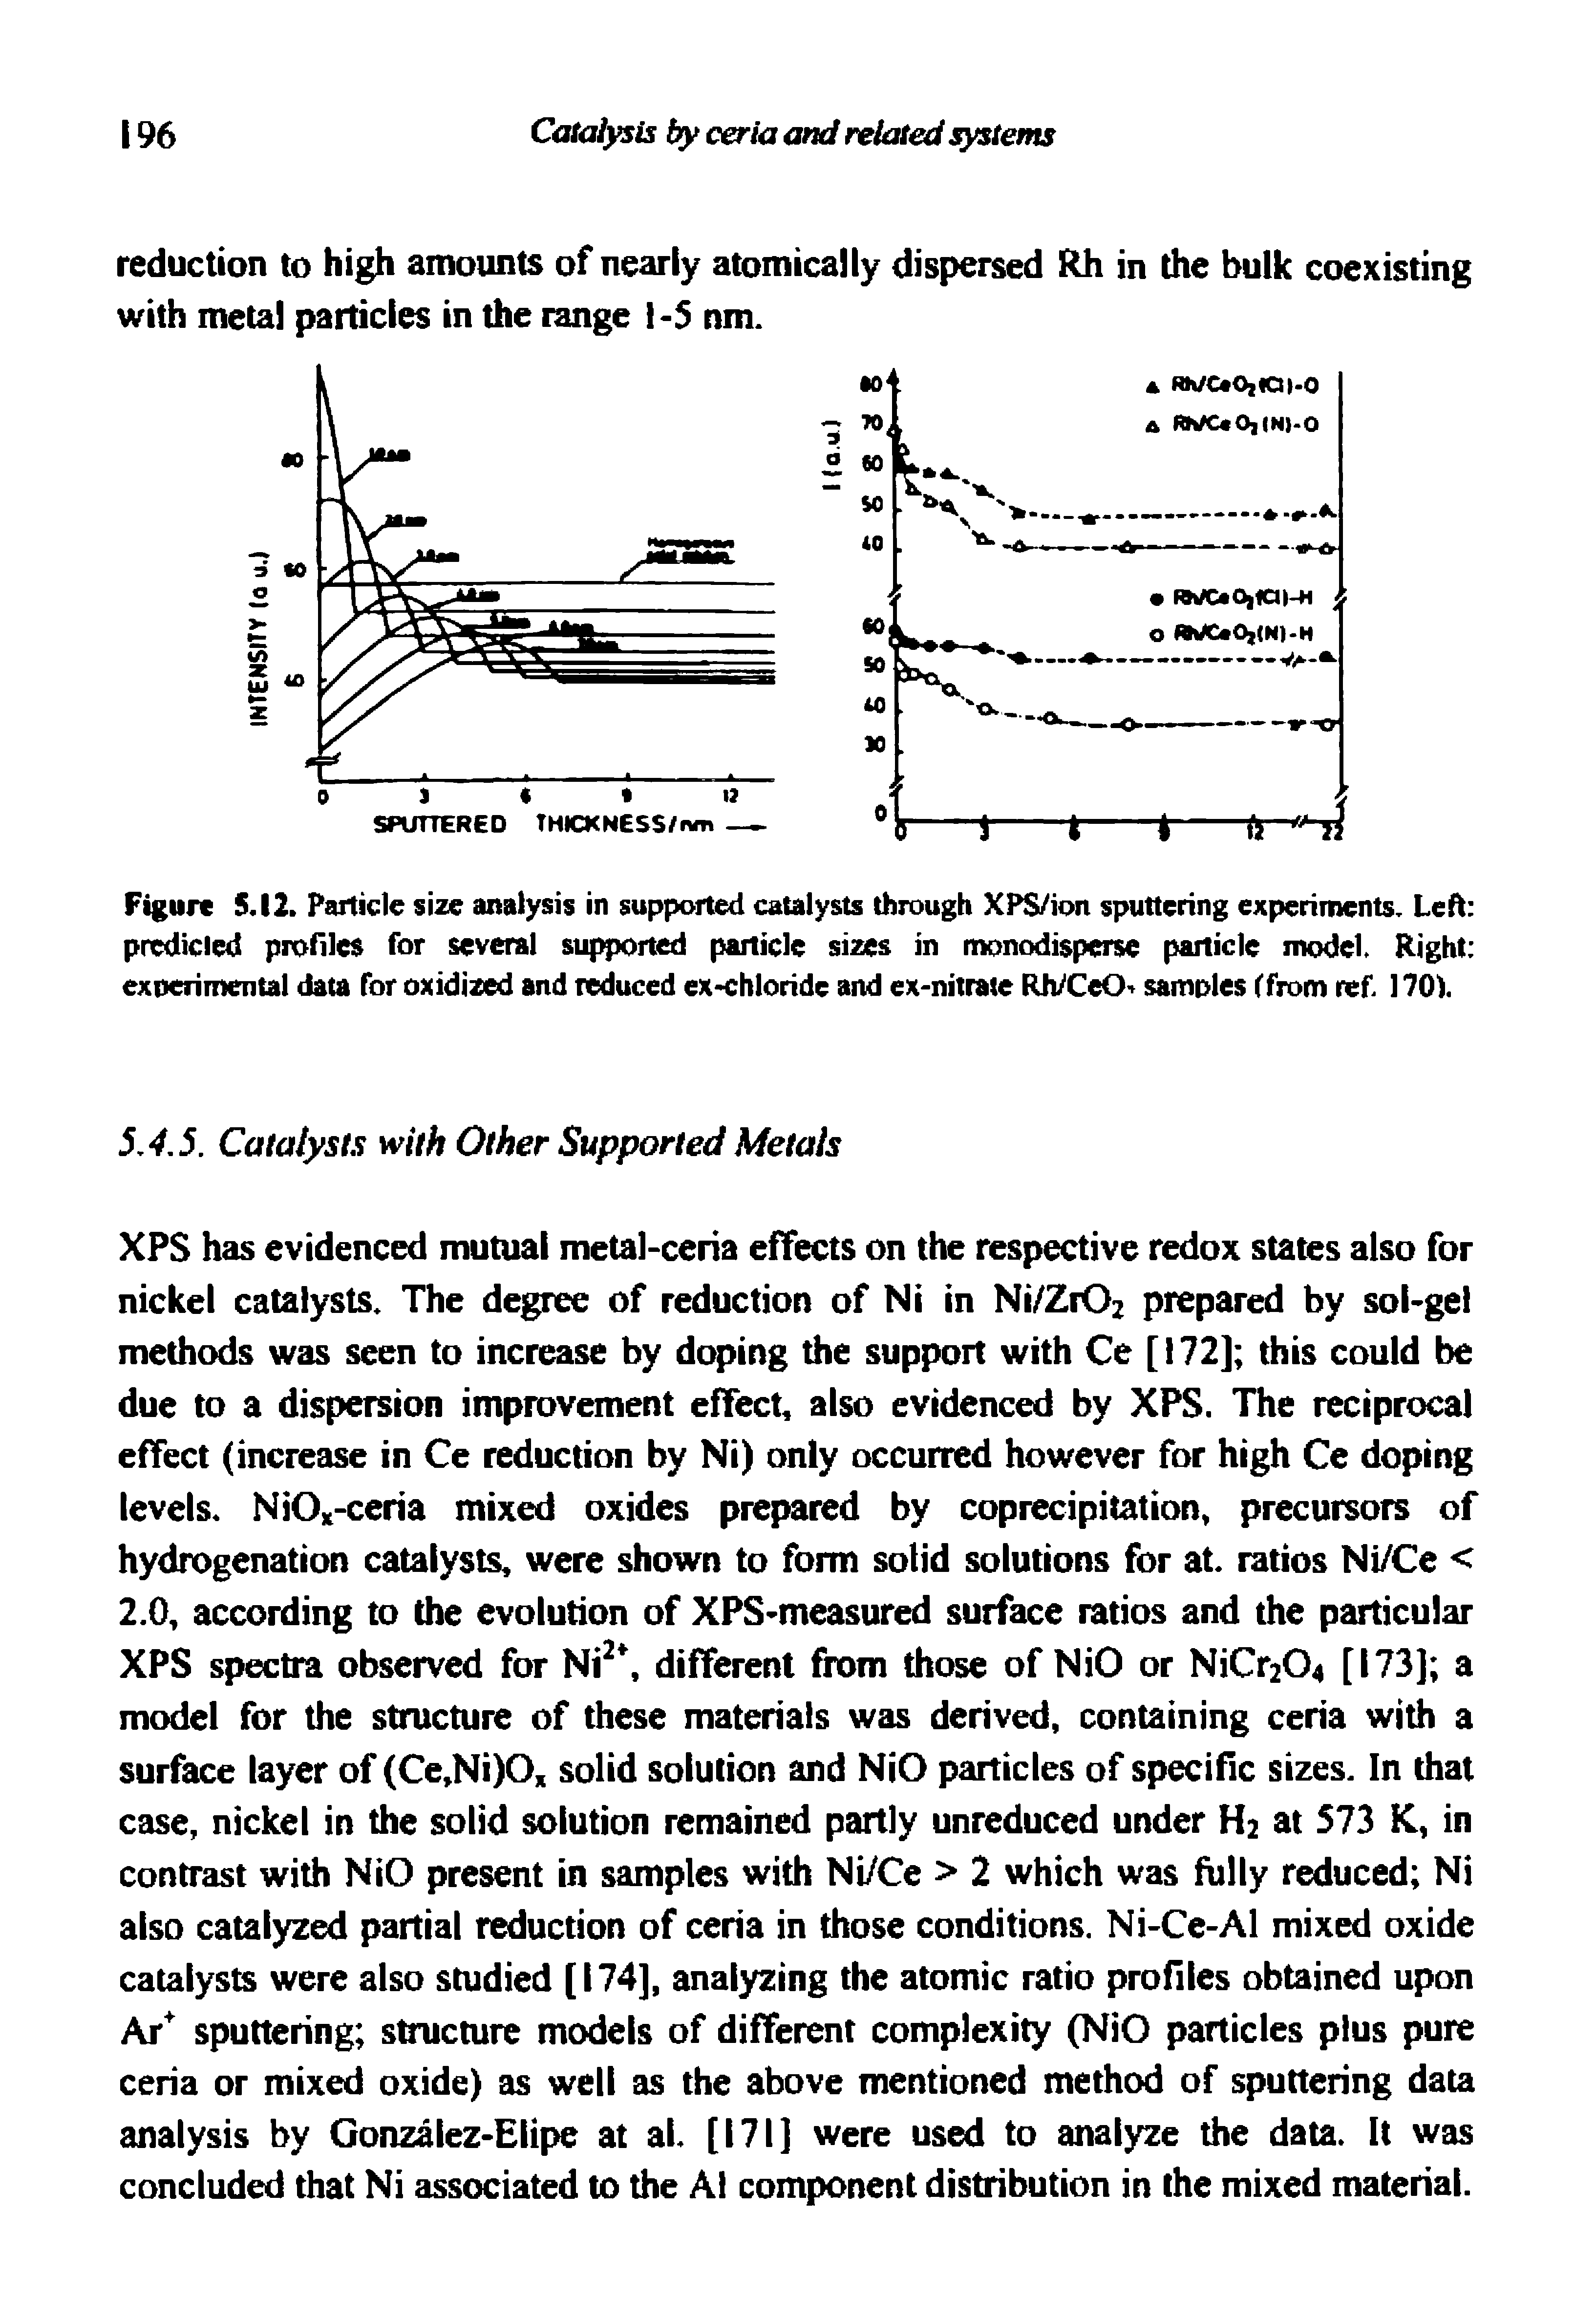 Figure 5.12. Particle size analysis in supix>]ted catalysts through XPS/ion sputtering experiments. Led predicted profiles for several suf rted particle sizes in monodisperse particle model Right experimental data for oxidized and reduced ex-chloride and ex-nitrate RhyCeO samples (from ref 170).